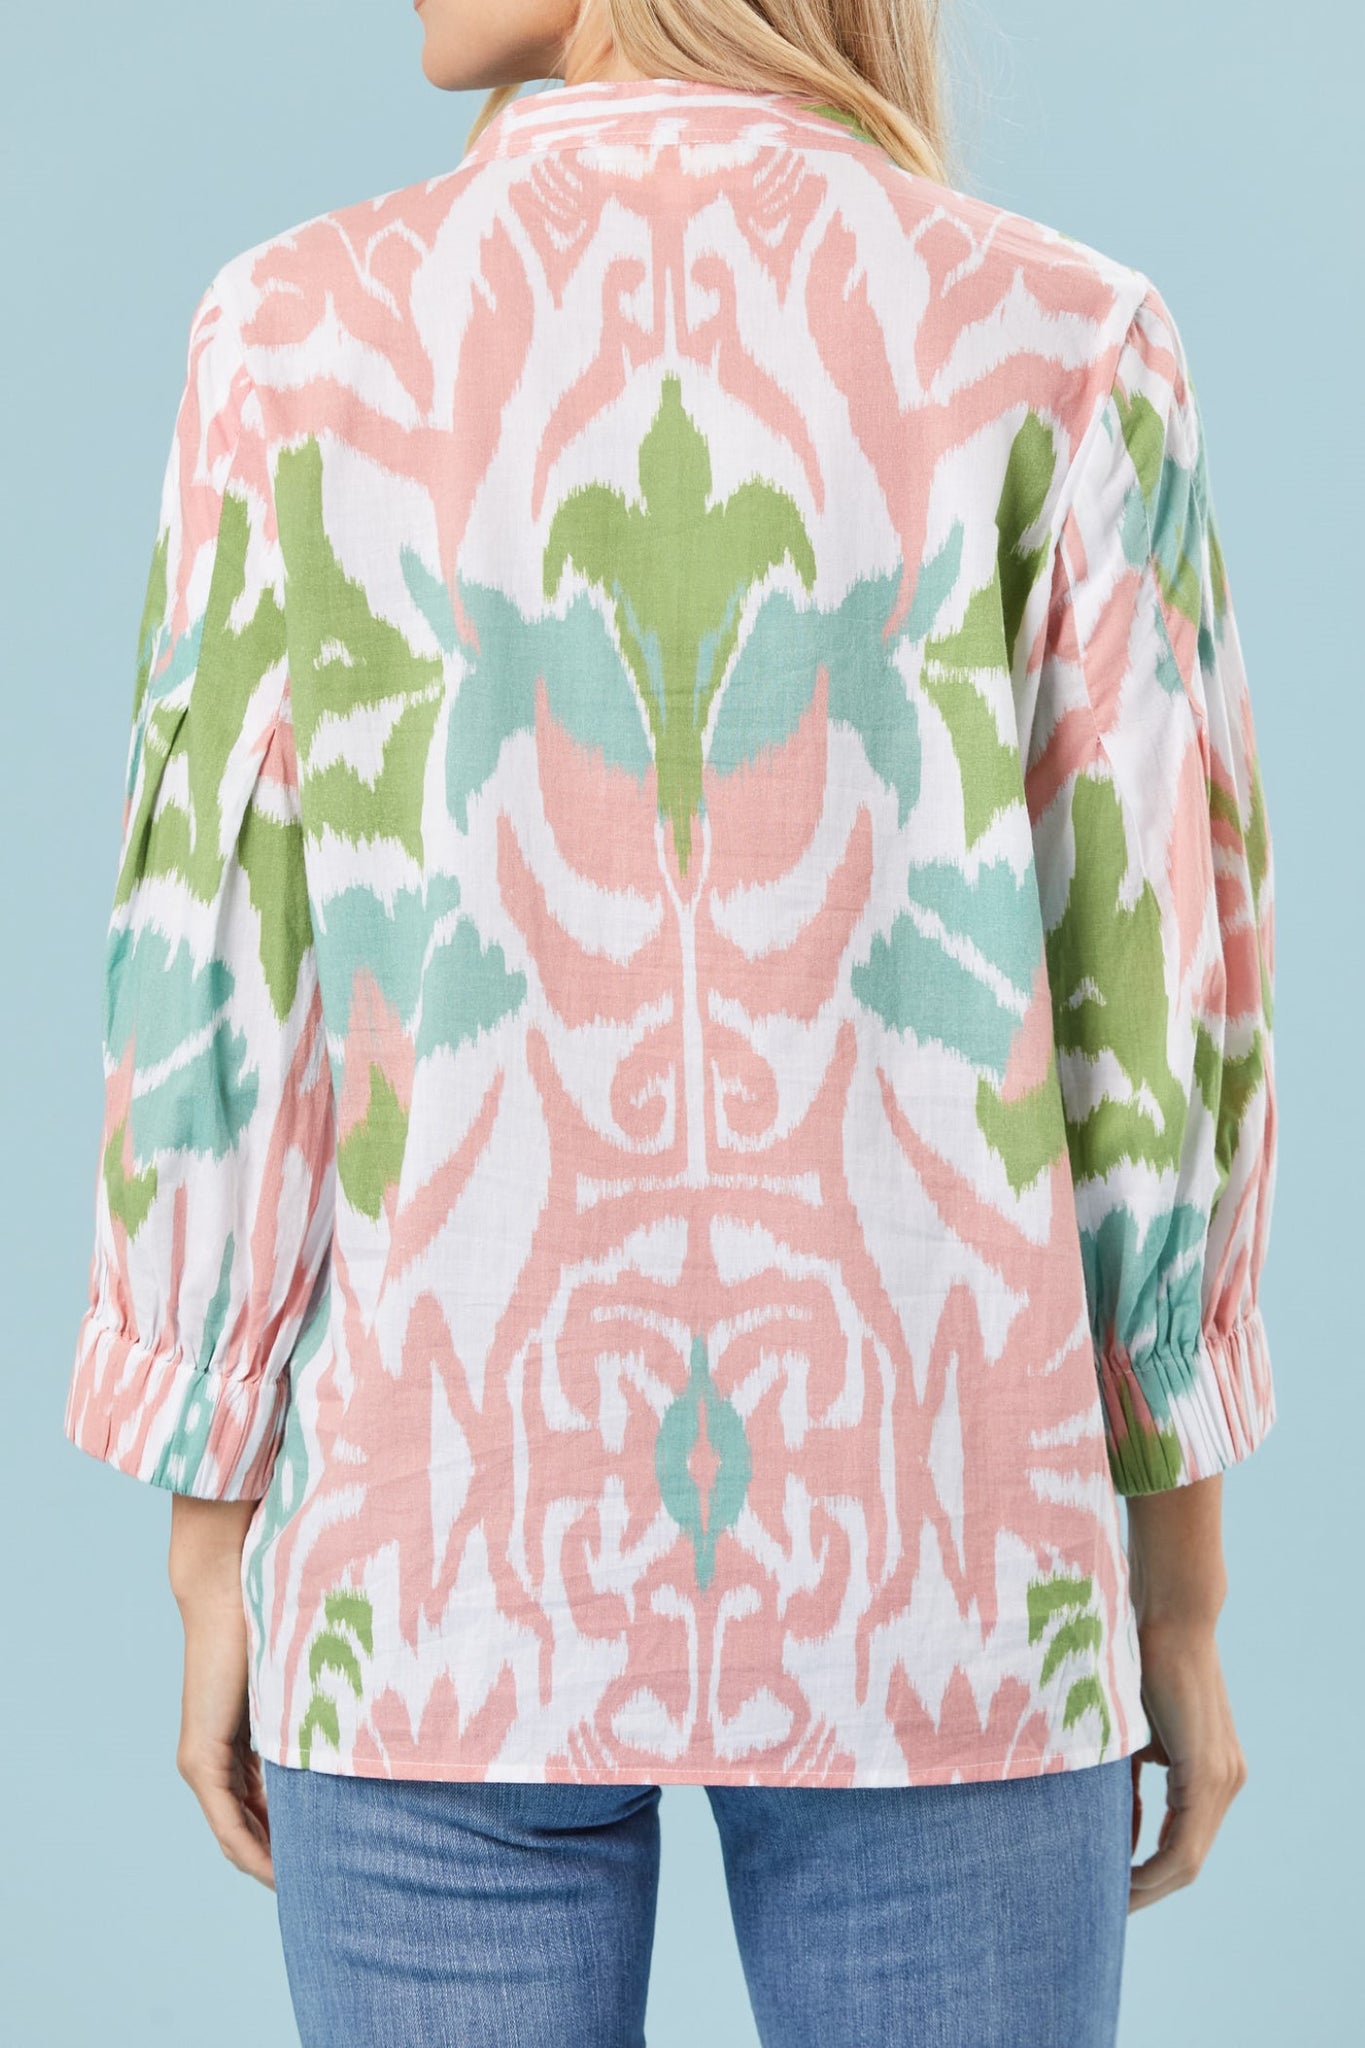 Olive Tunic in Tulip Ikat Pink + Green + Teal